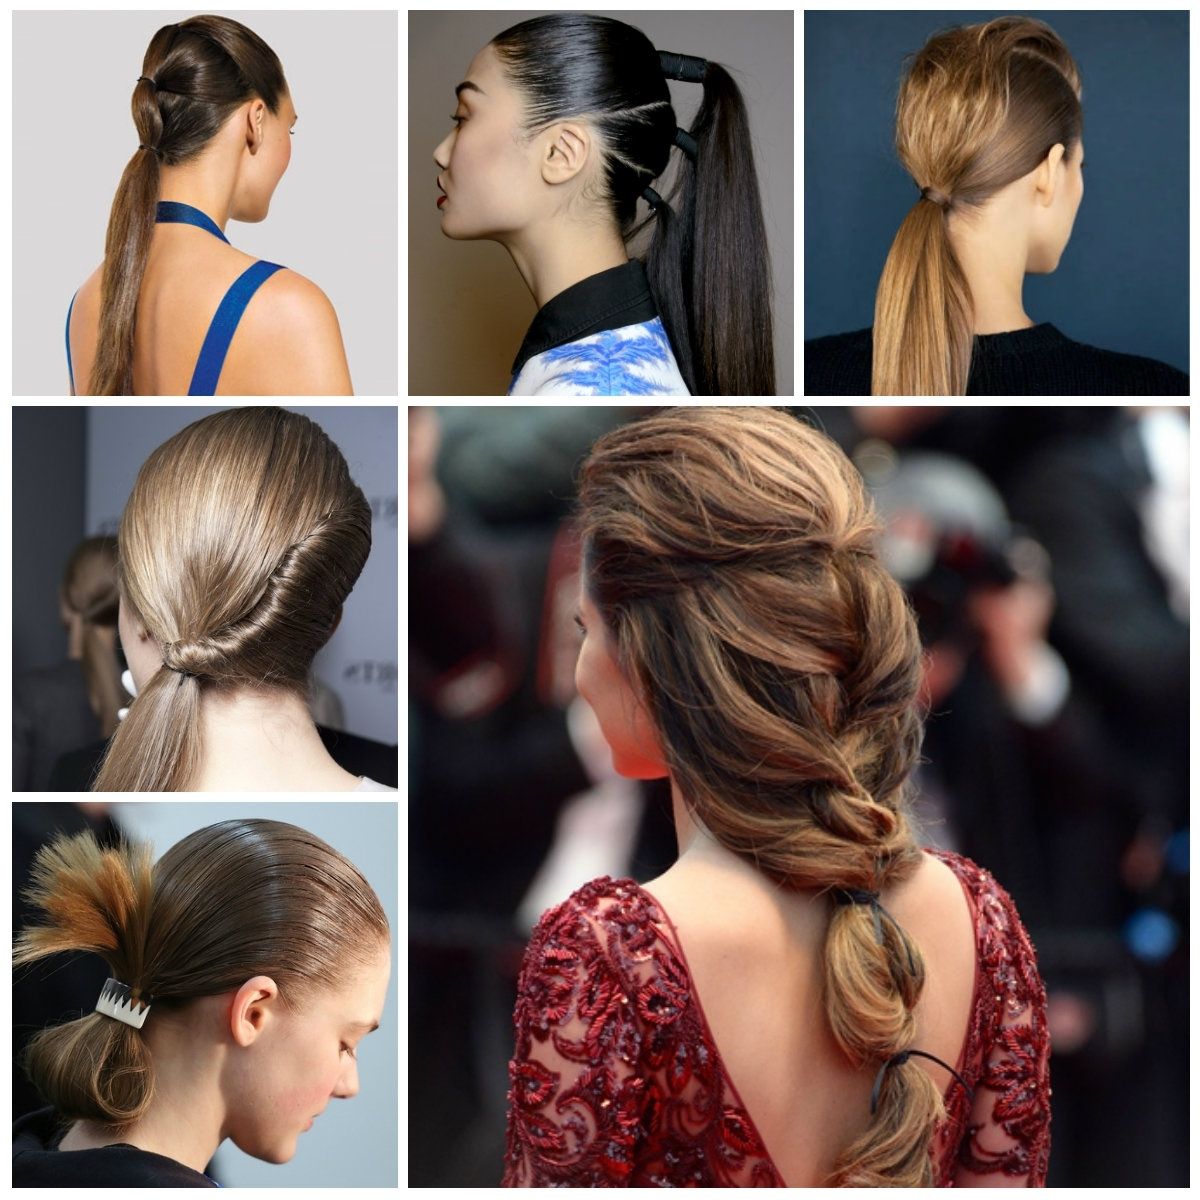 Hairstyles For Women 2019, Haircuts For Long Intended For Widely Used Casual Retro Ponytail Hairstyles (View 9 of 20)